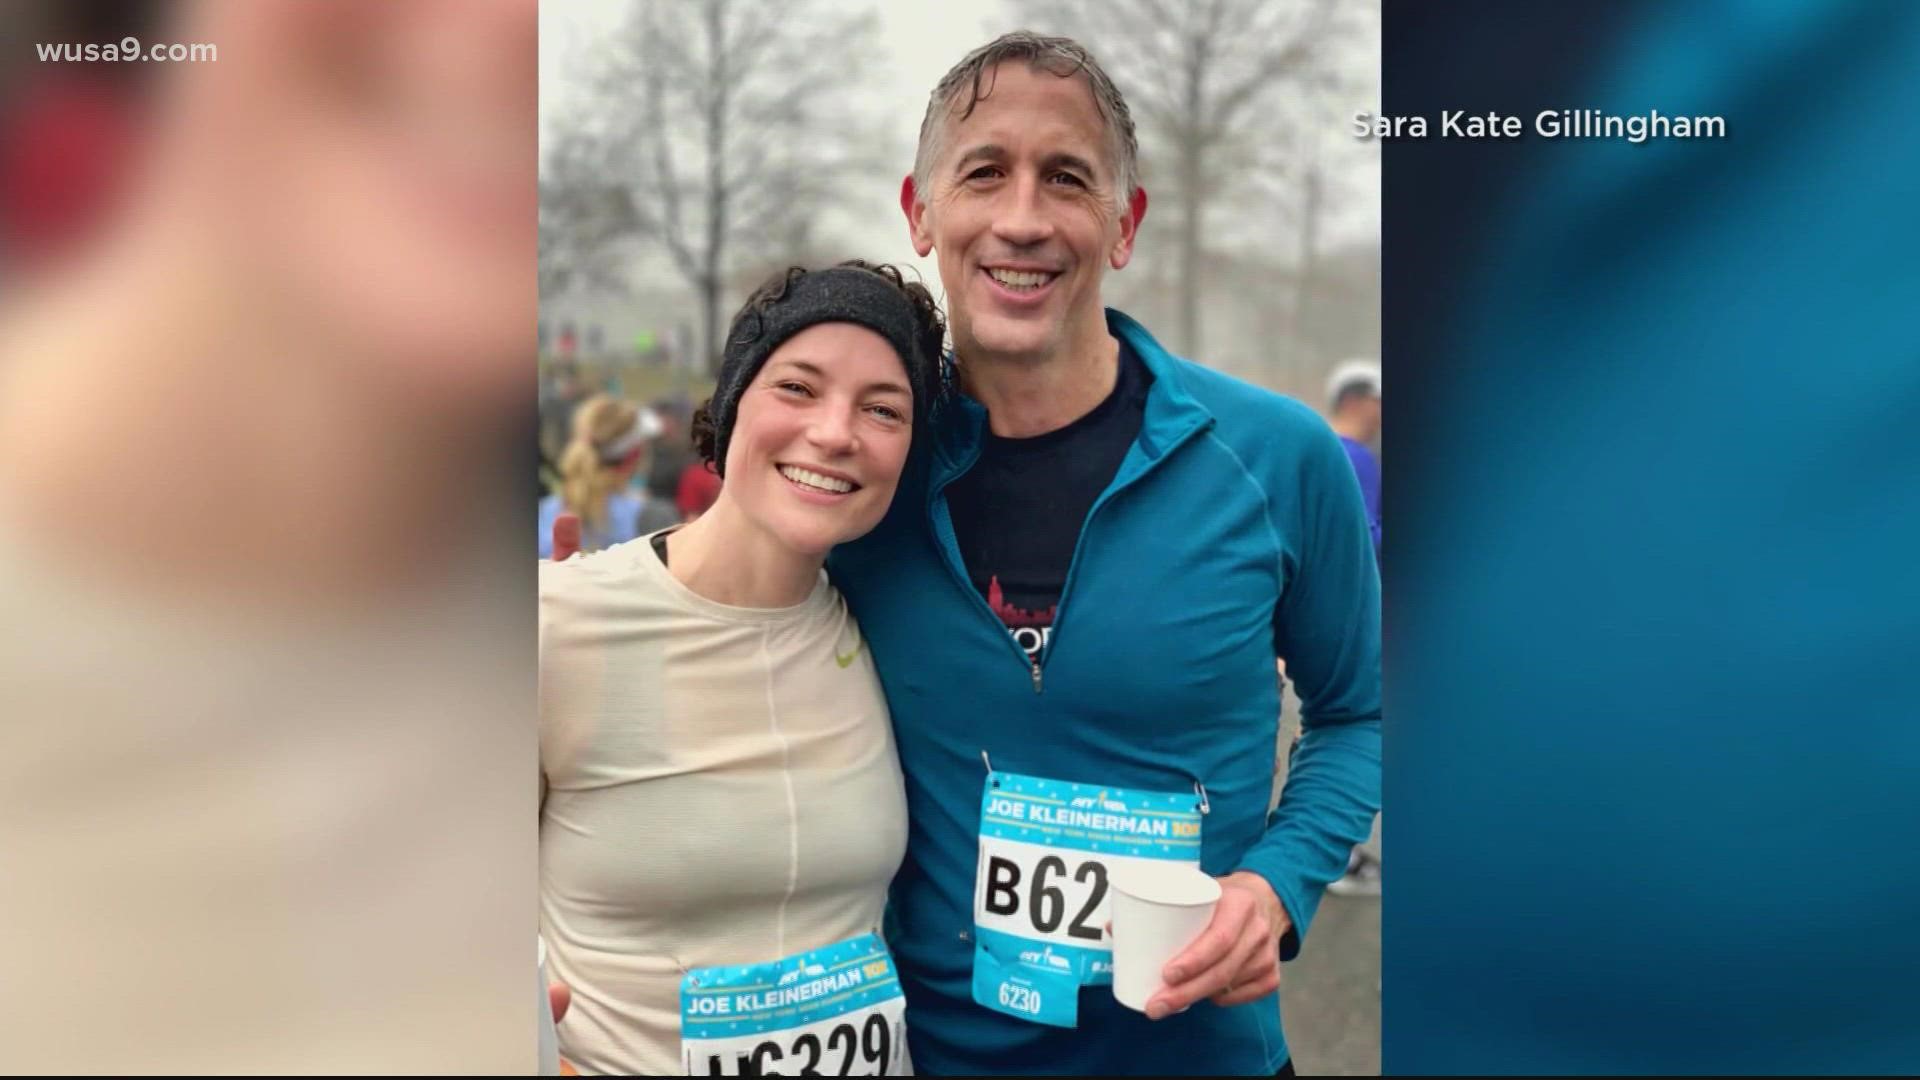 The 50th running of the marathon included a field of more than 30,000 people, but these two runners had an extra special bond.